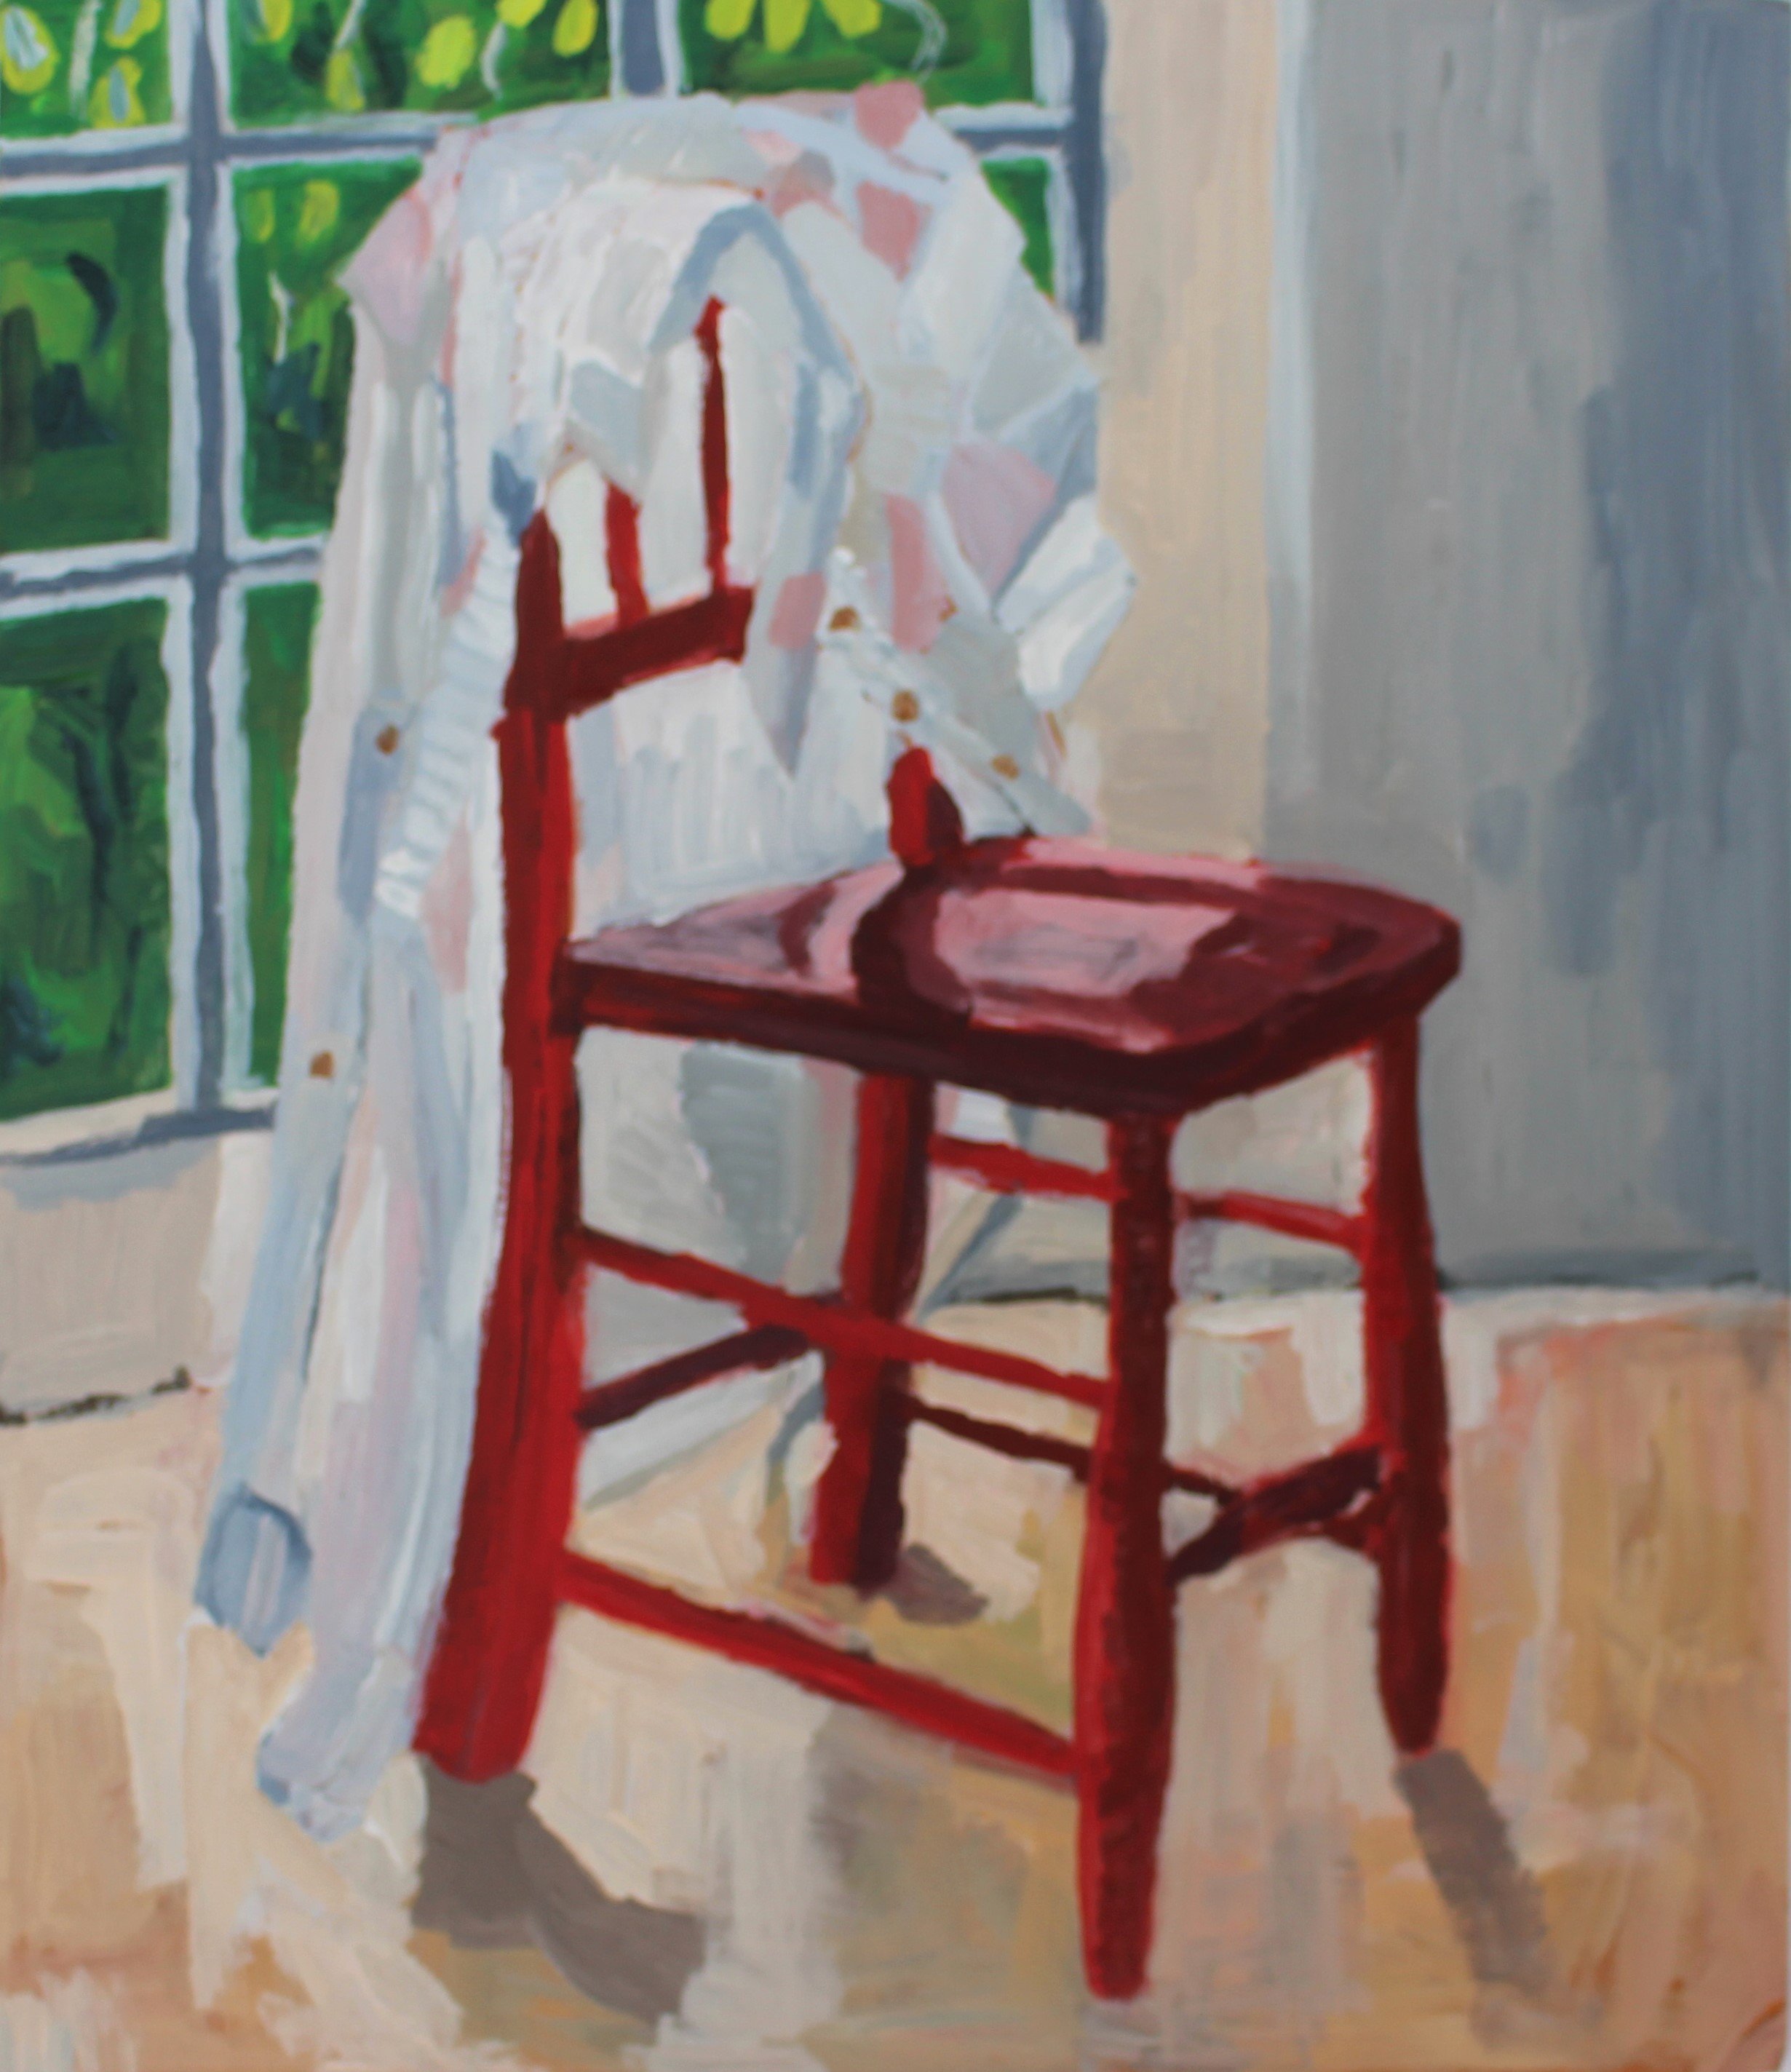 The Little Red Chair ©Catherine Gowthorpe